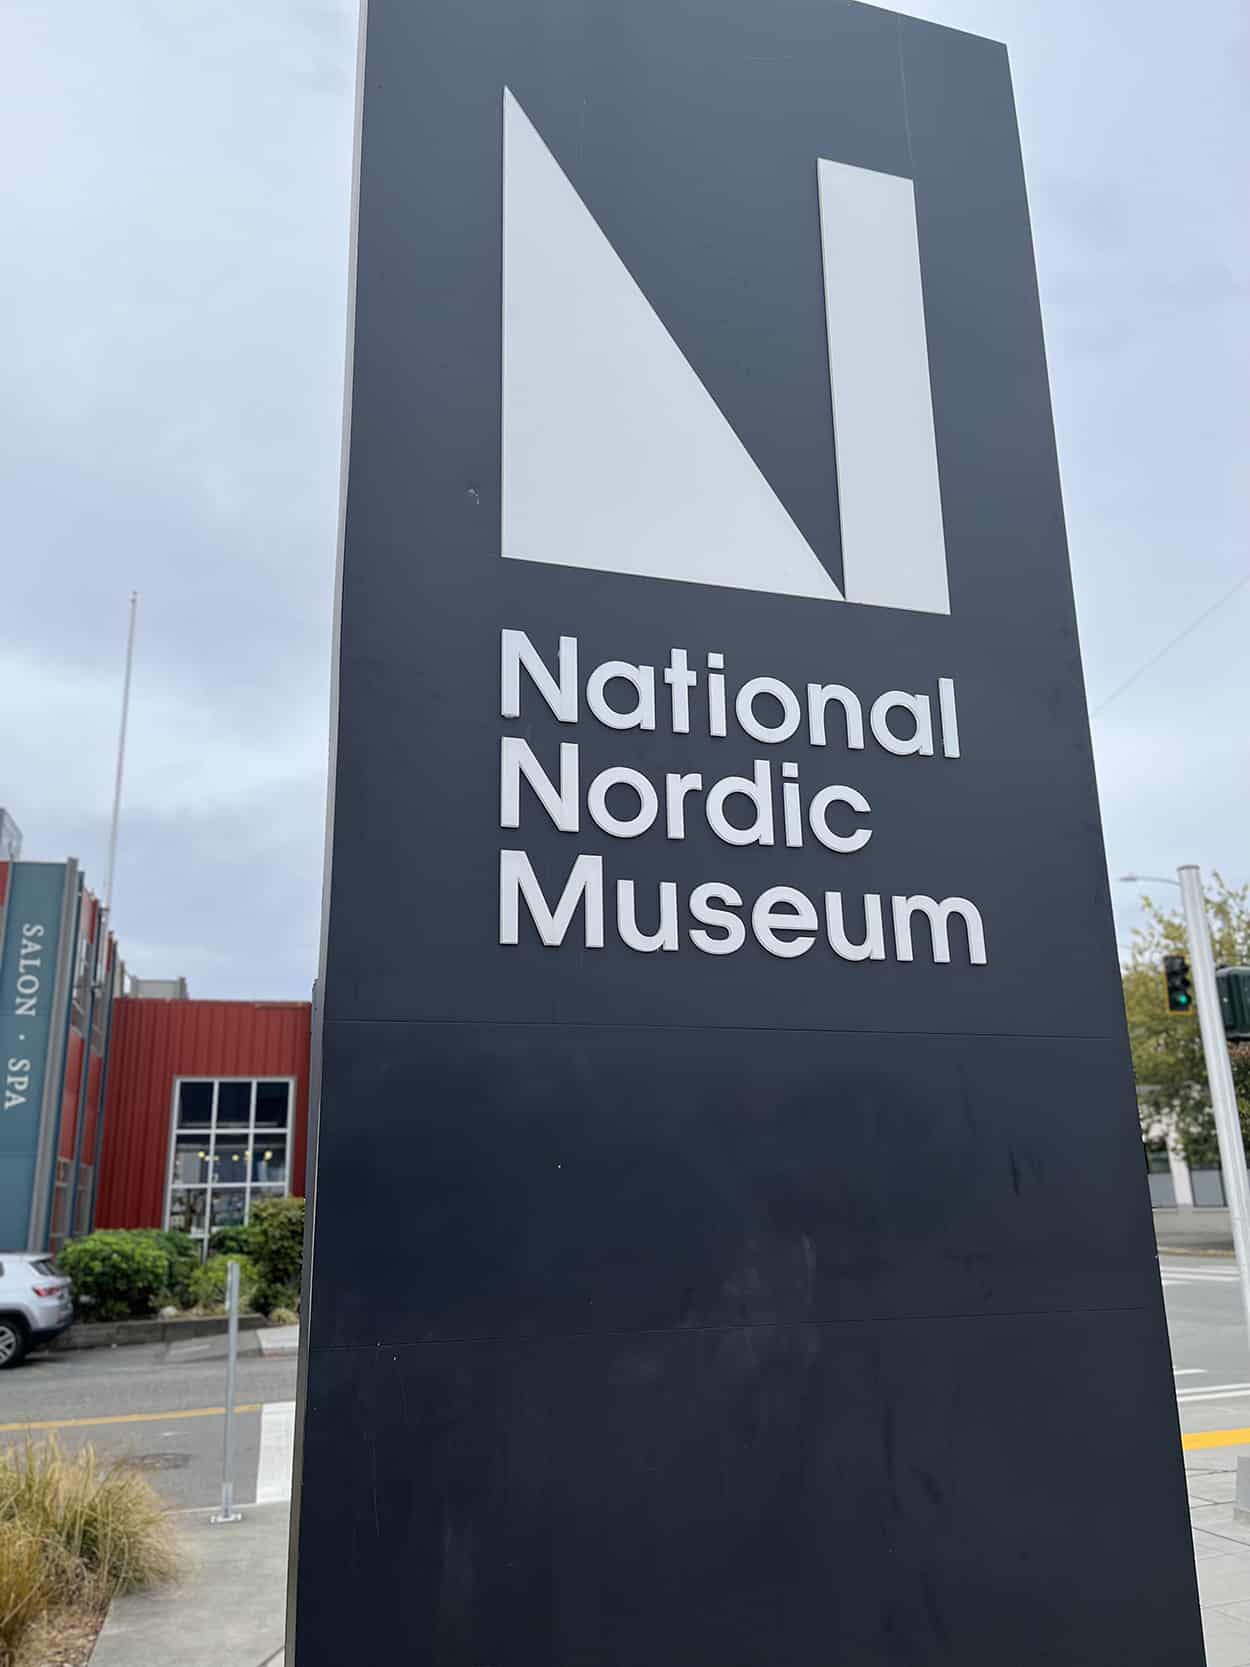 The National Nordic Museum is in Ballard. Photo by Mary Williams